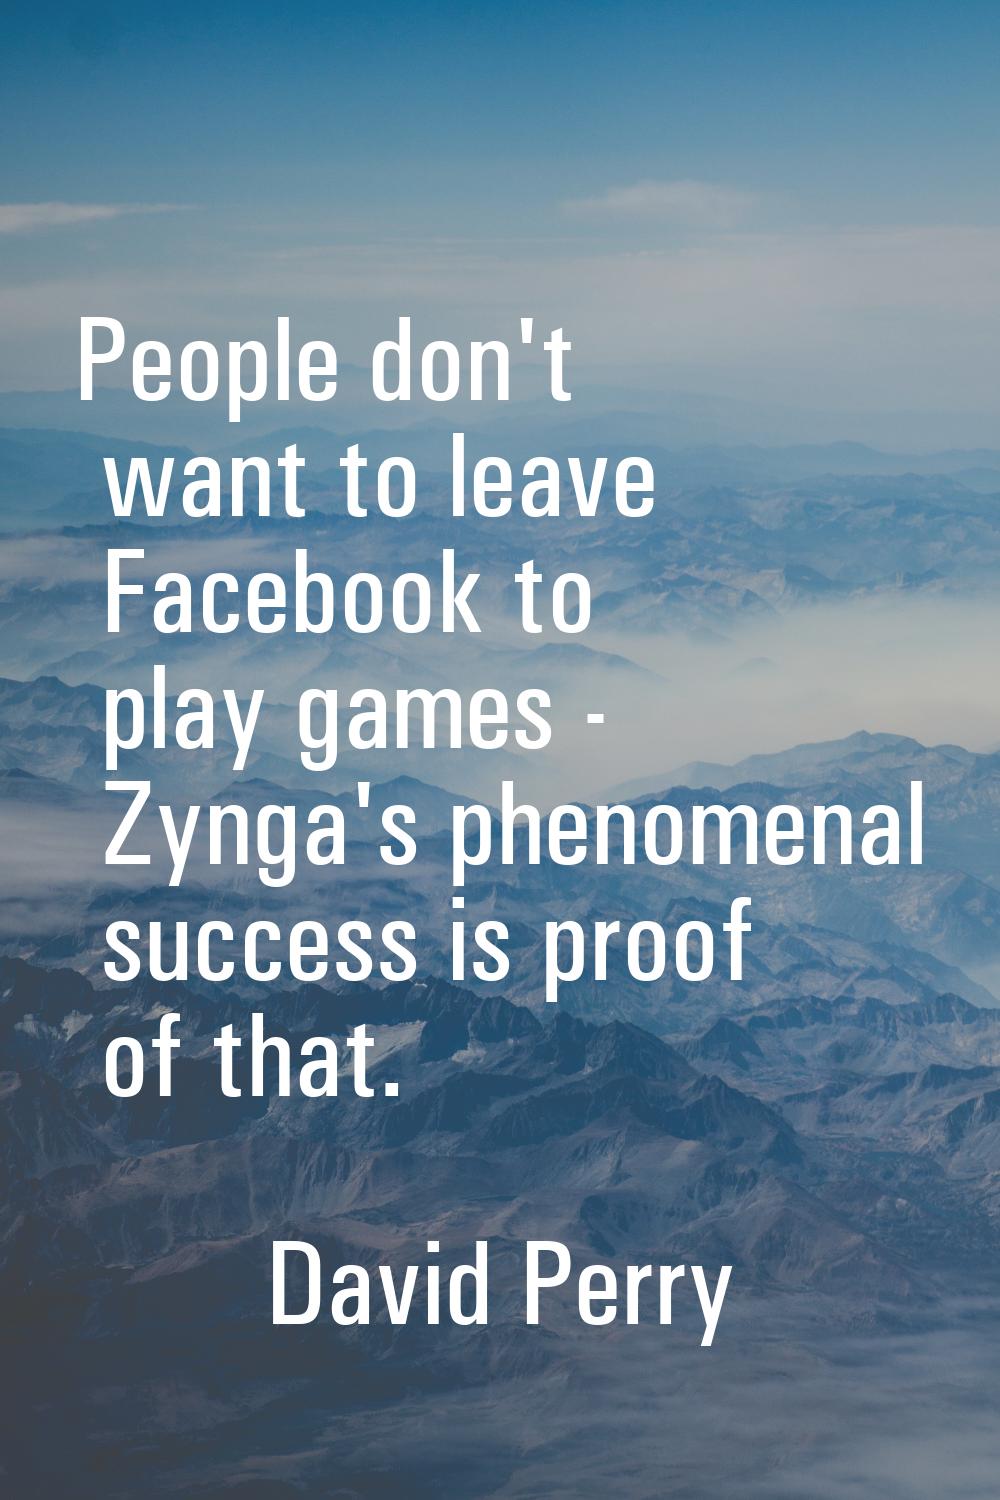 People don't want to leave Facebook to play games - Zynga's phenomenal success is proof of that.